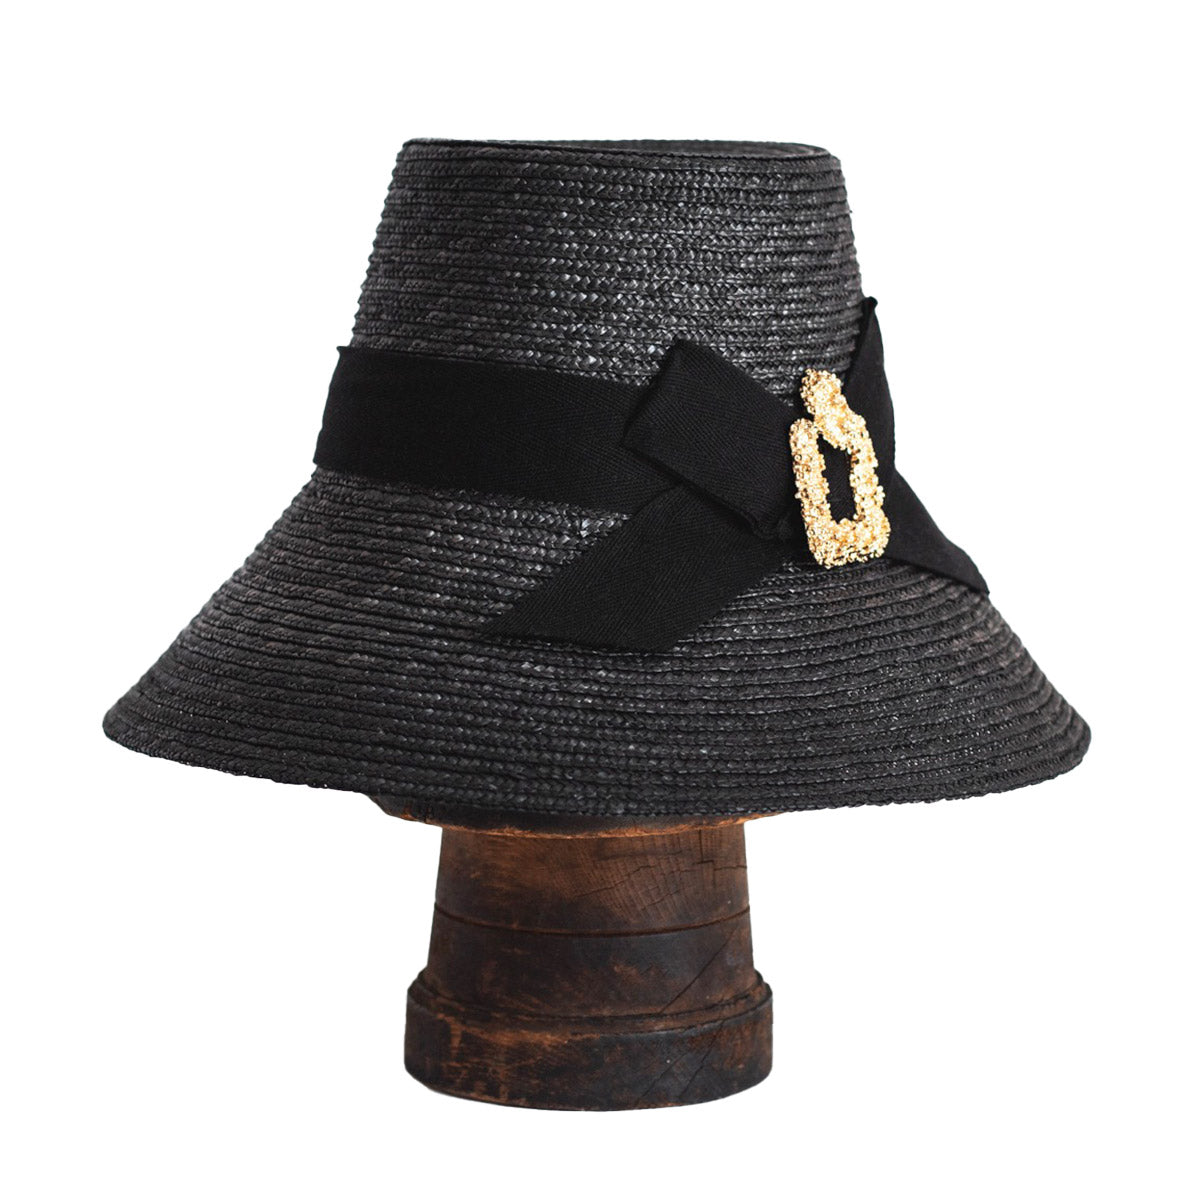 Sophisticated black straw hat CARRY